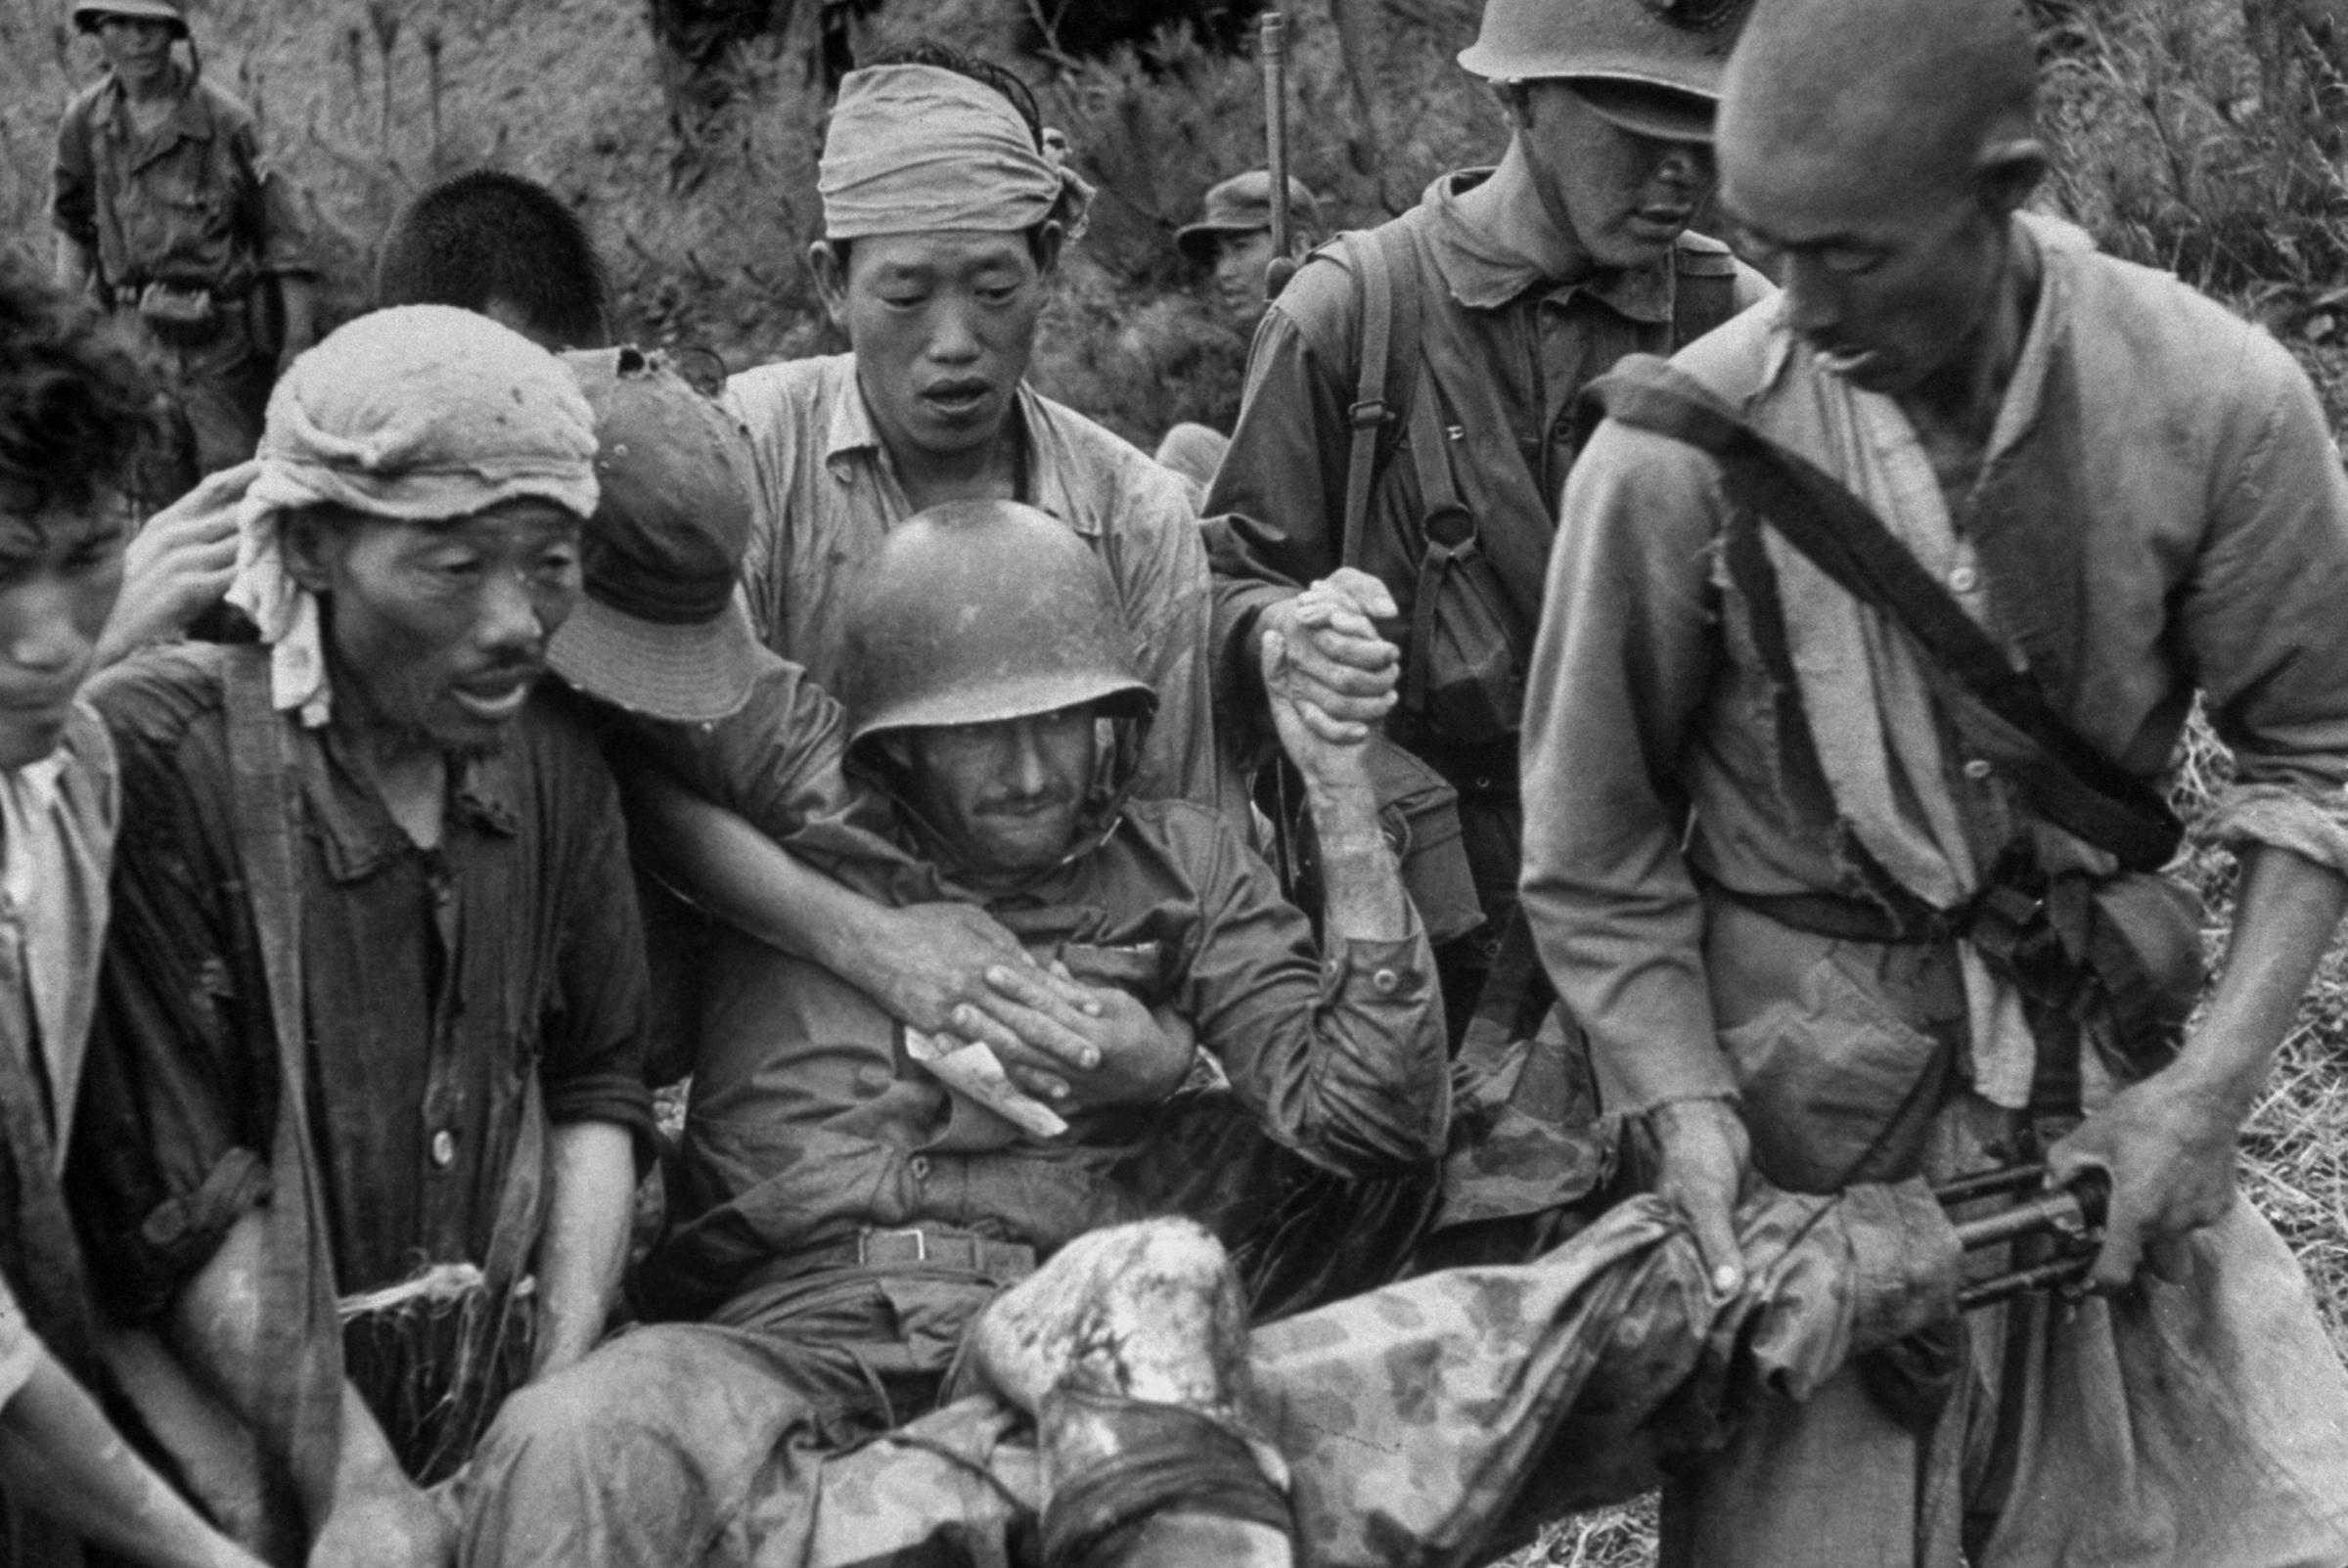 A wounded American Marine is carried on stretcher improvised from a machine gun, Korea 1950.